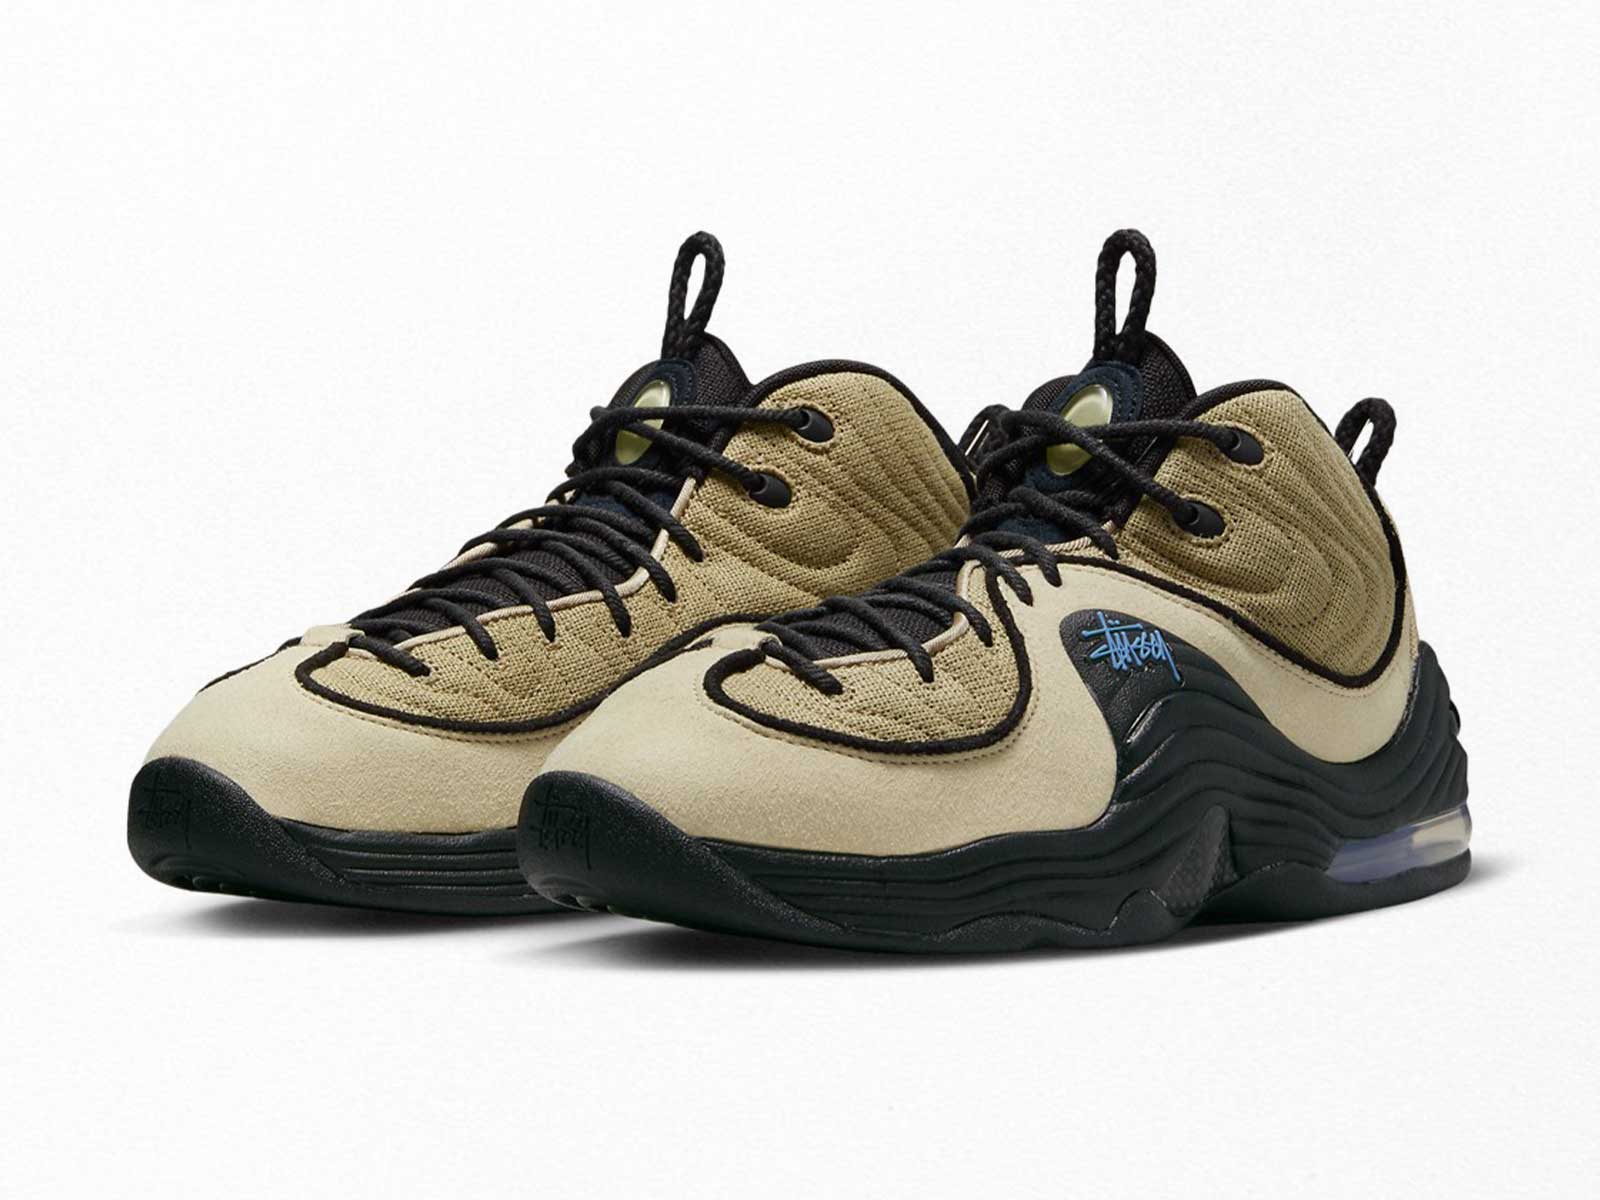 The Stüssy x Nike Air Max Penny 2 reinvents itself in ochre colour